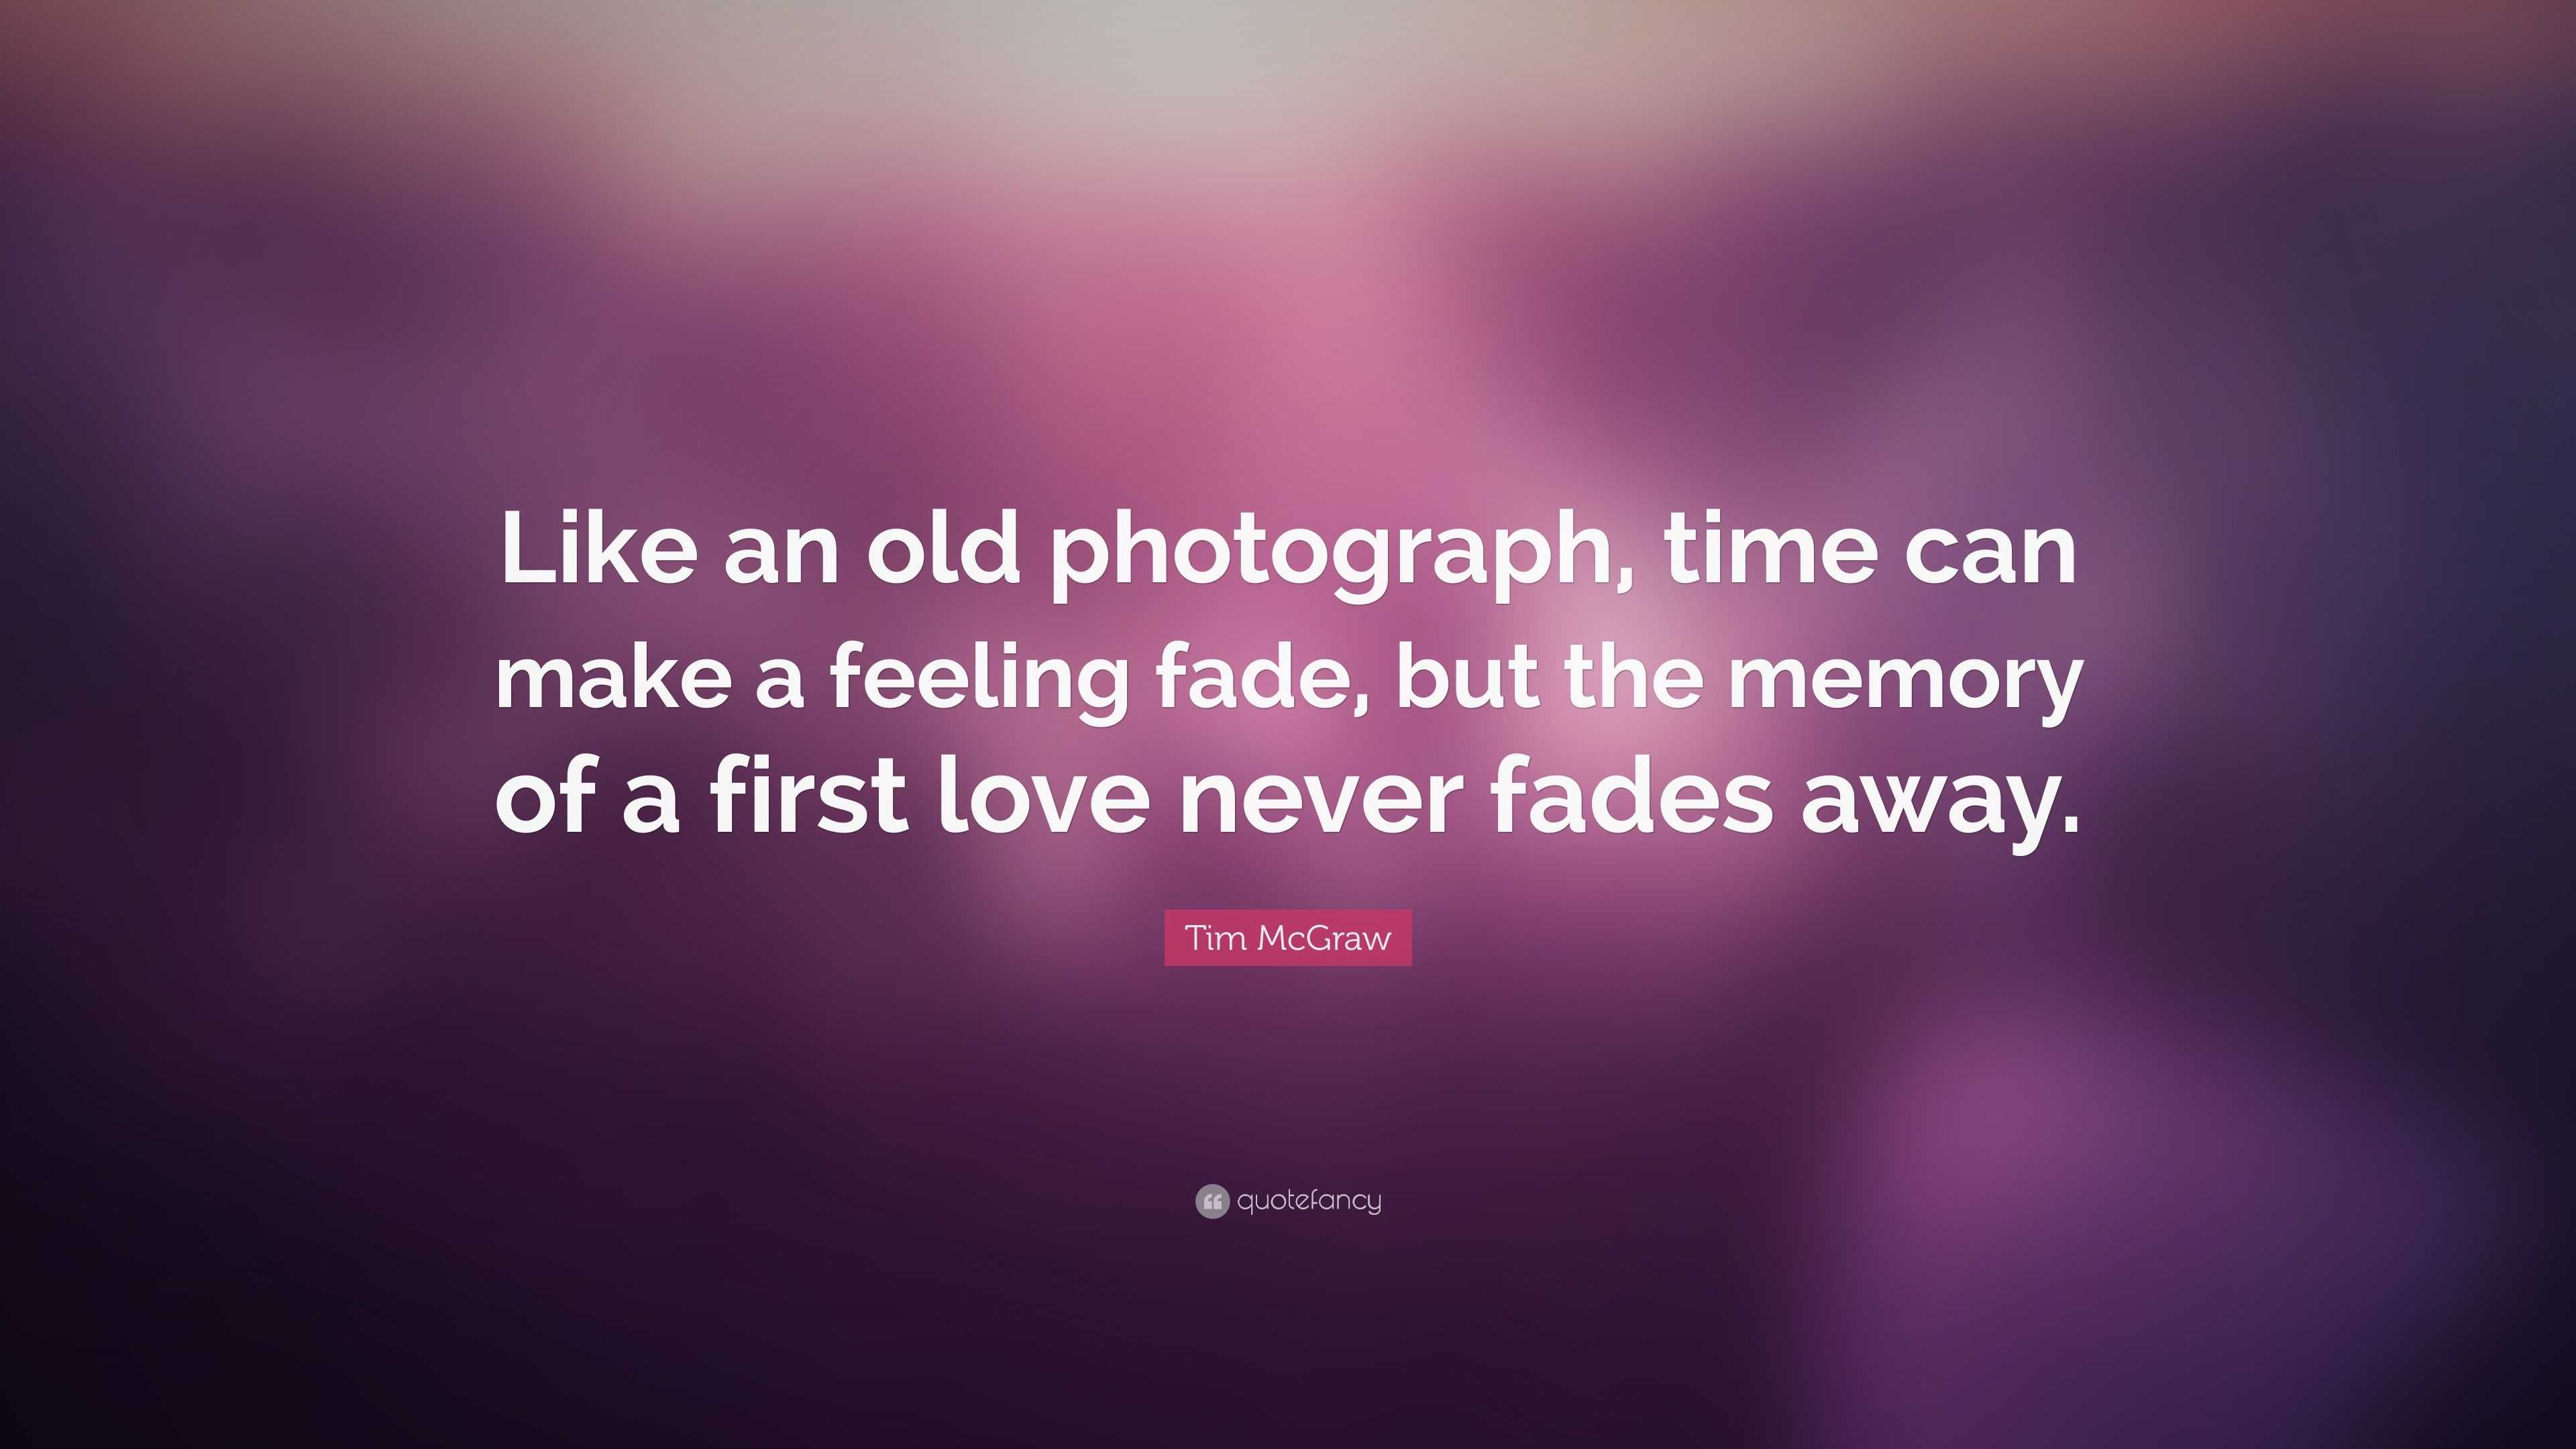 Tim McGraw Quote: “Like an old photograph, time can make a feeling fade ...